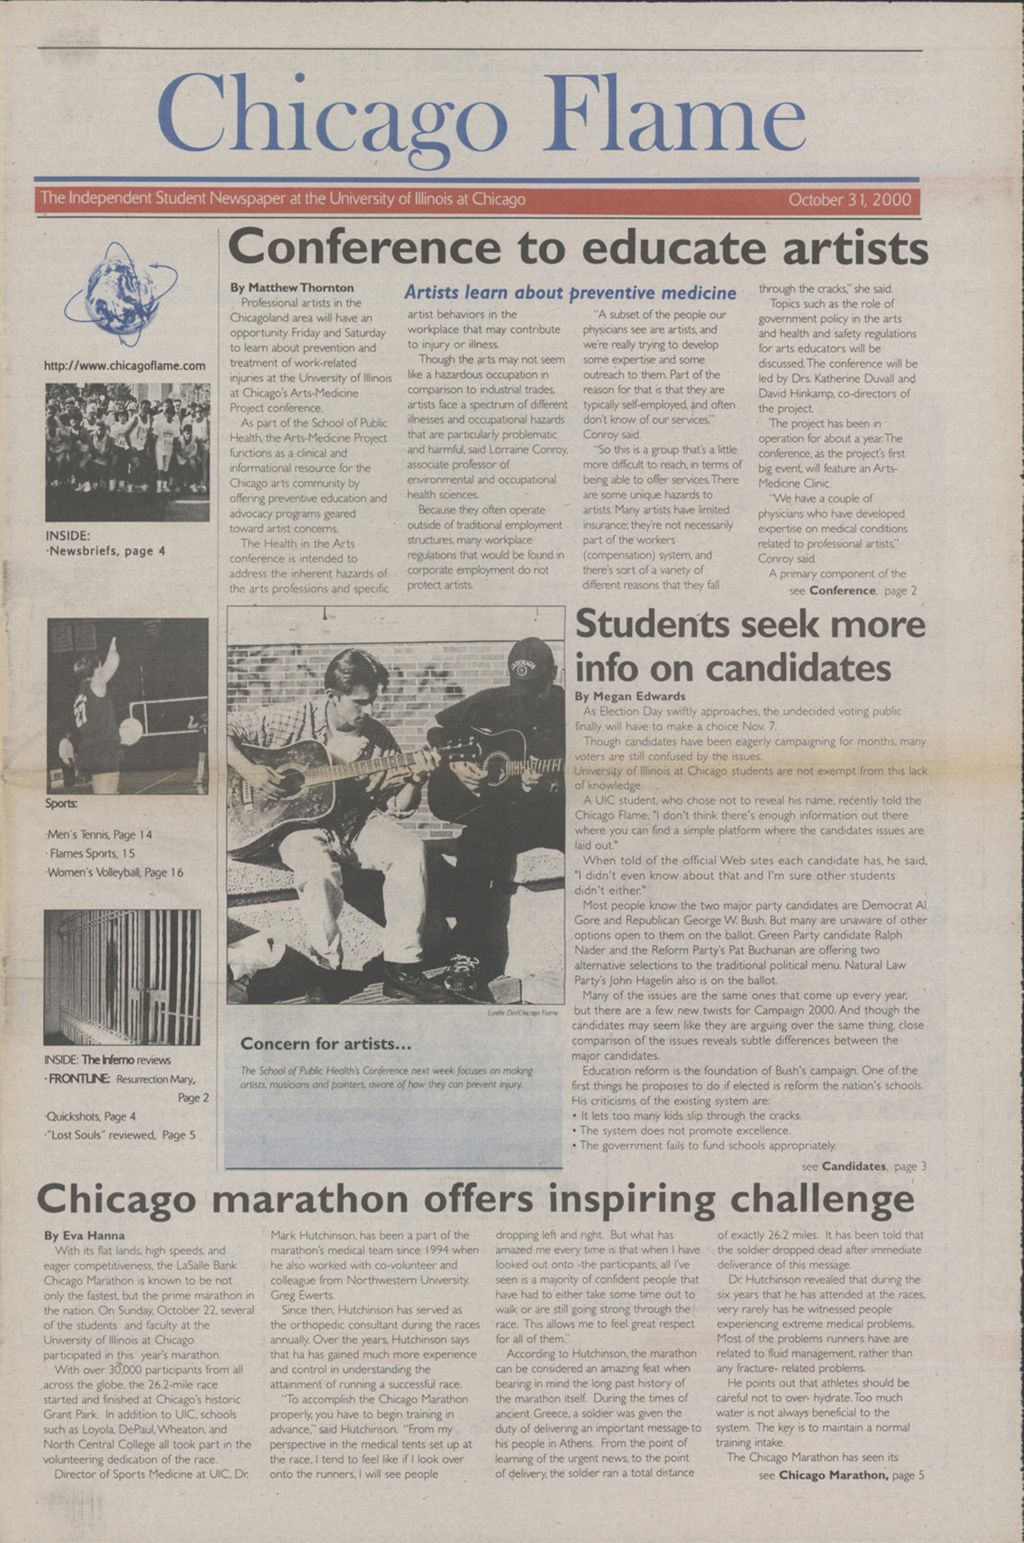 Miniature of Chicago Flame (October 31, 2000)